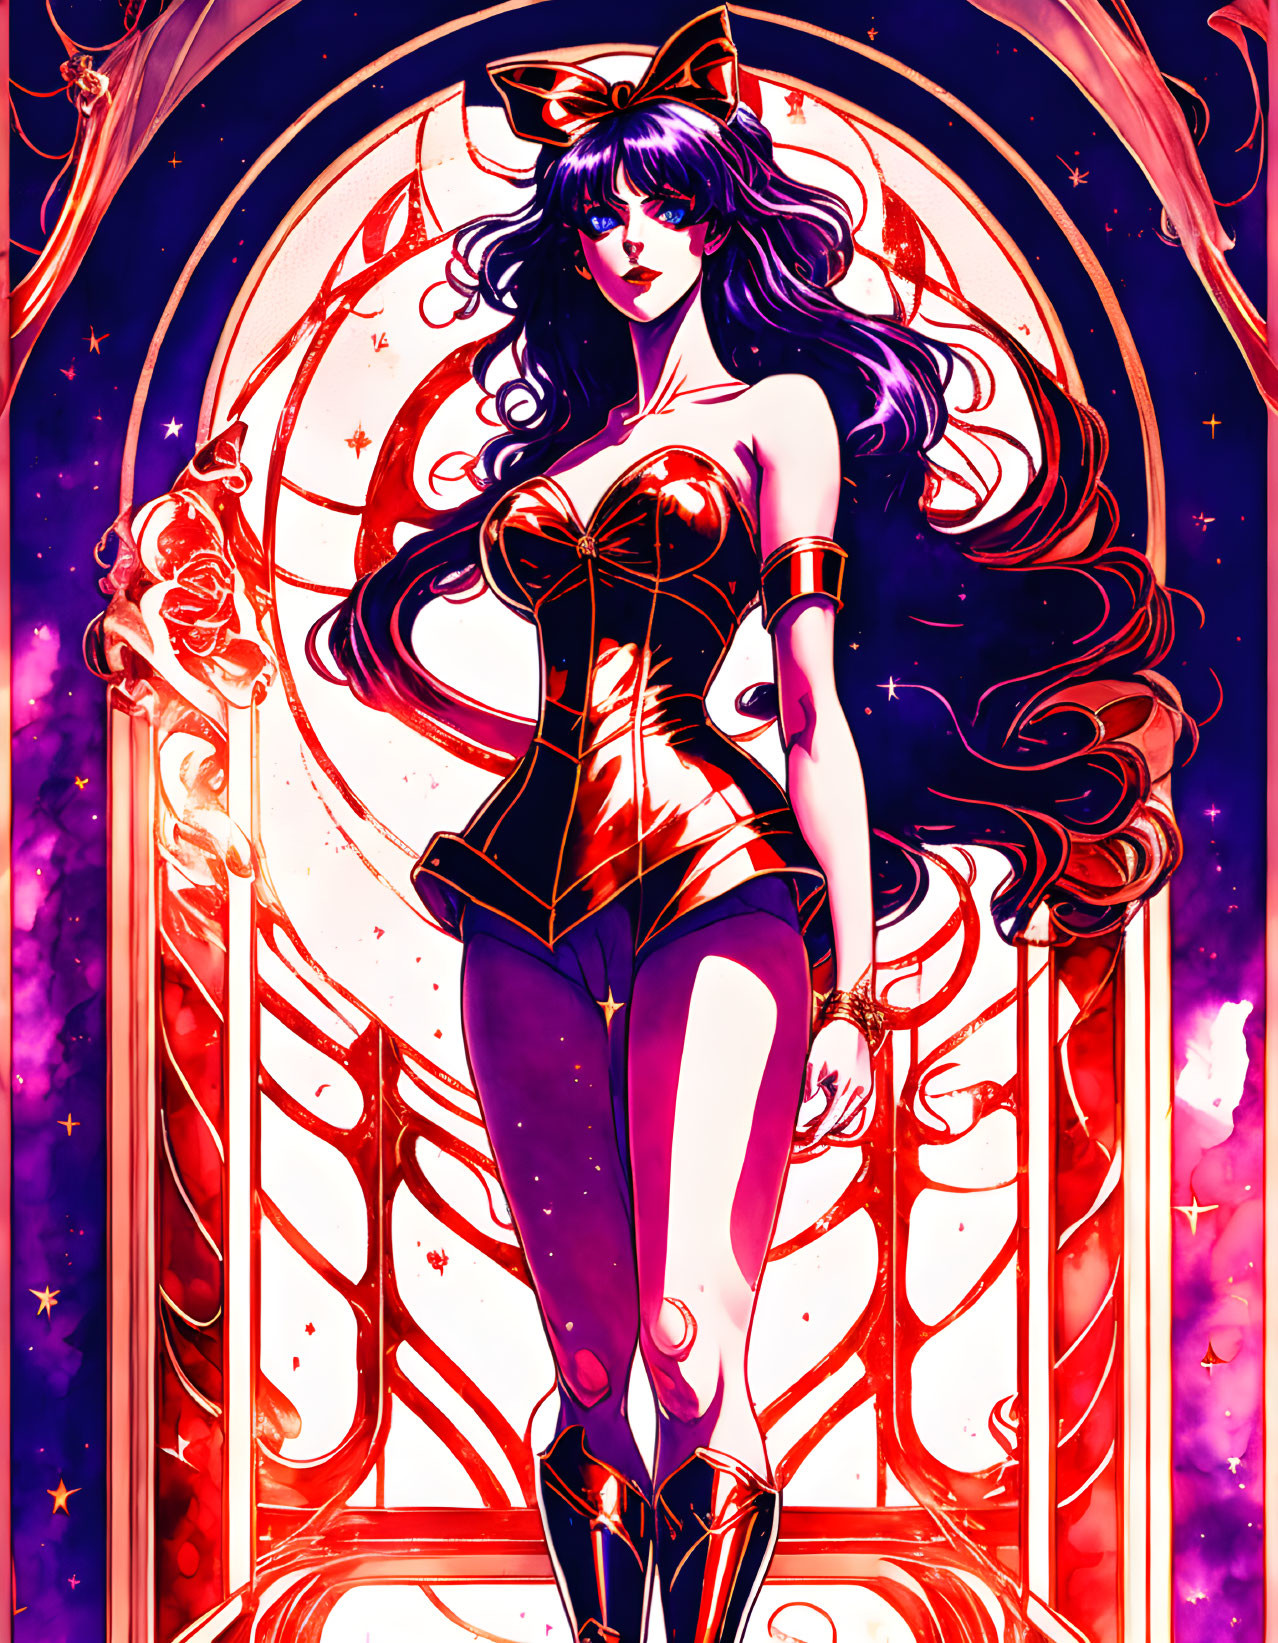 Illustration of a woman with black hair and cat ears in red bodysuit by cosmic window